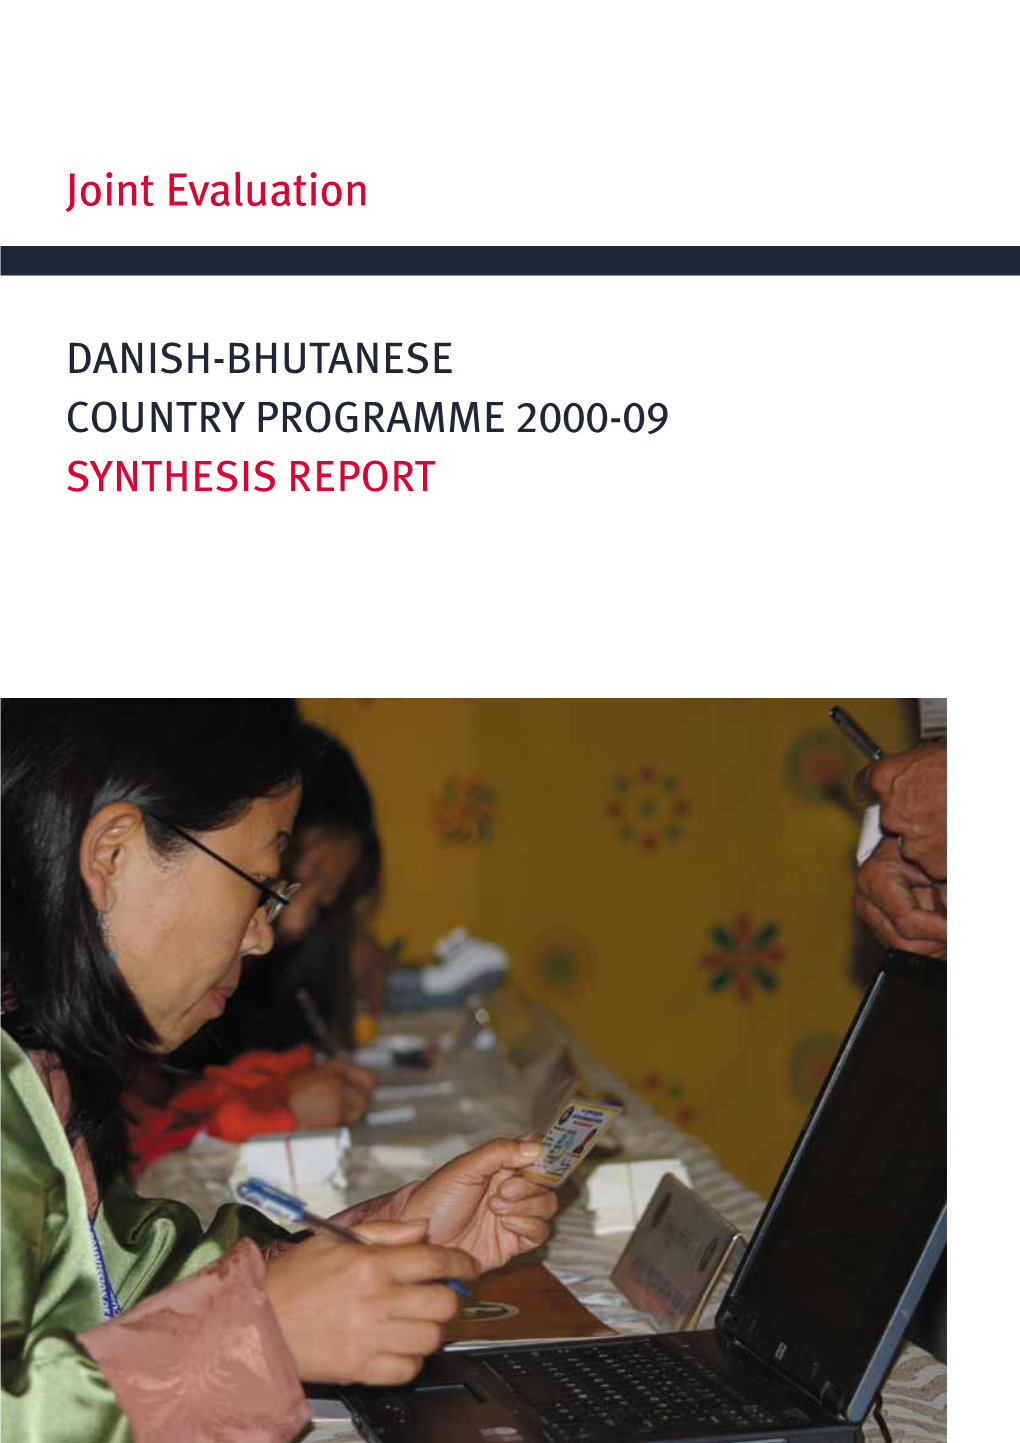 Joint Evaluation: Danish-Bhutanese Country Programme, 2000-09